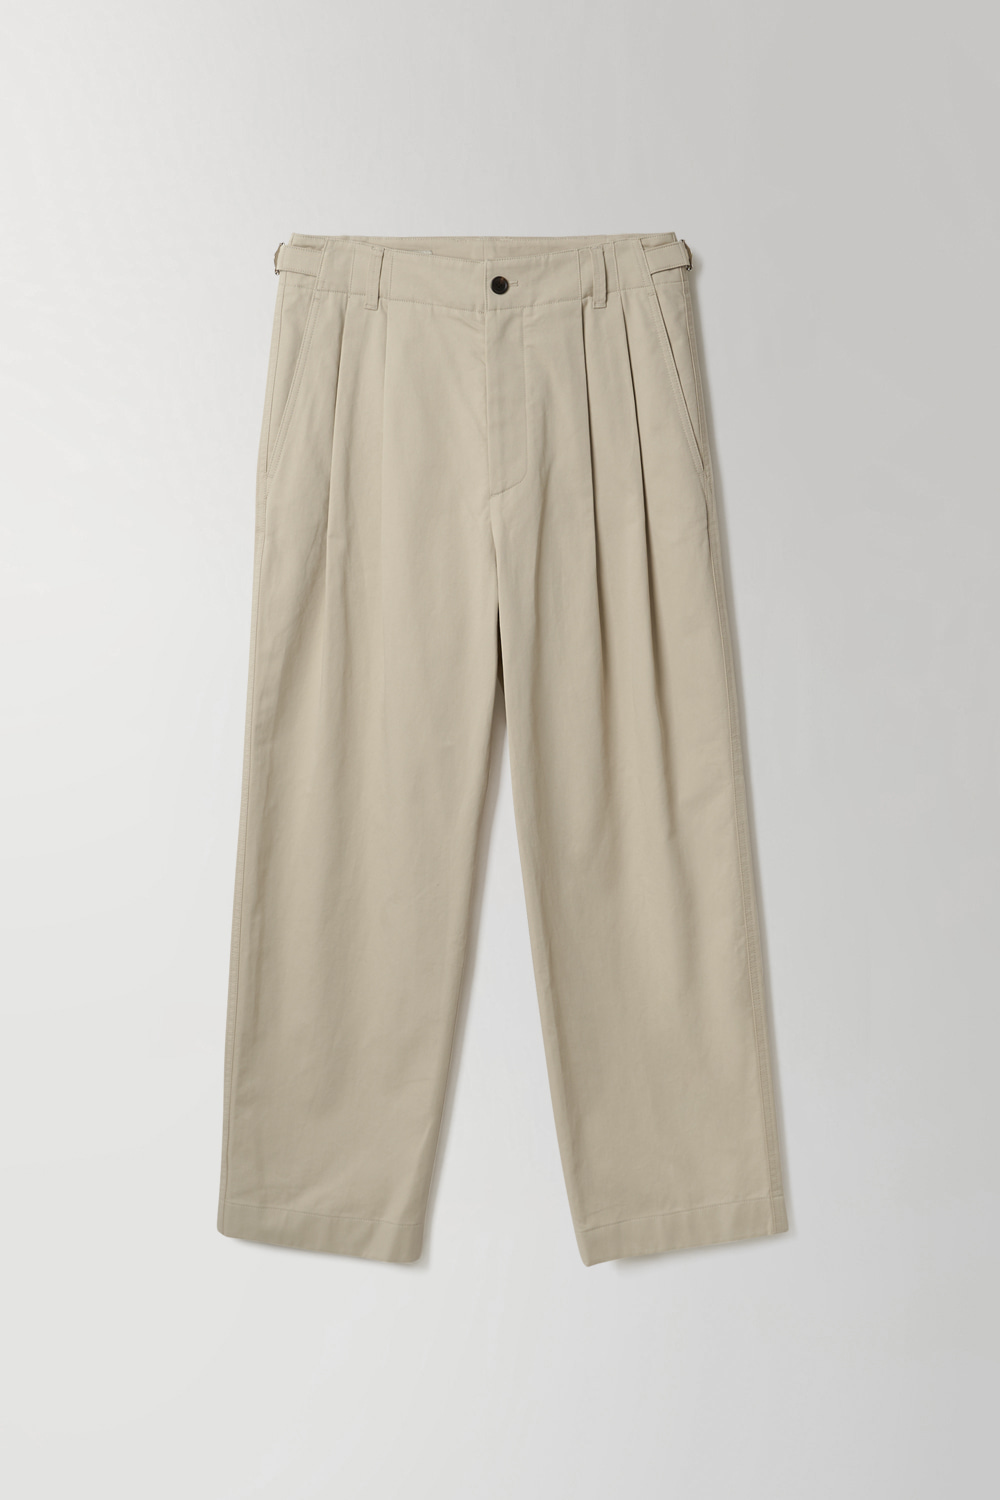 [4TH] TRAVELLER CHINO PANTS (TYPE1) - SAND BEIGE